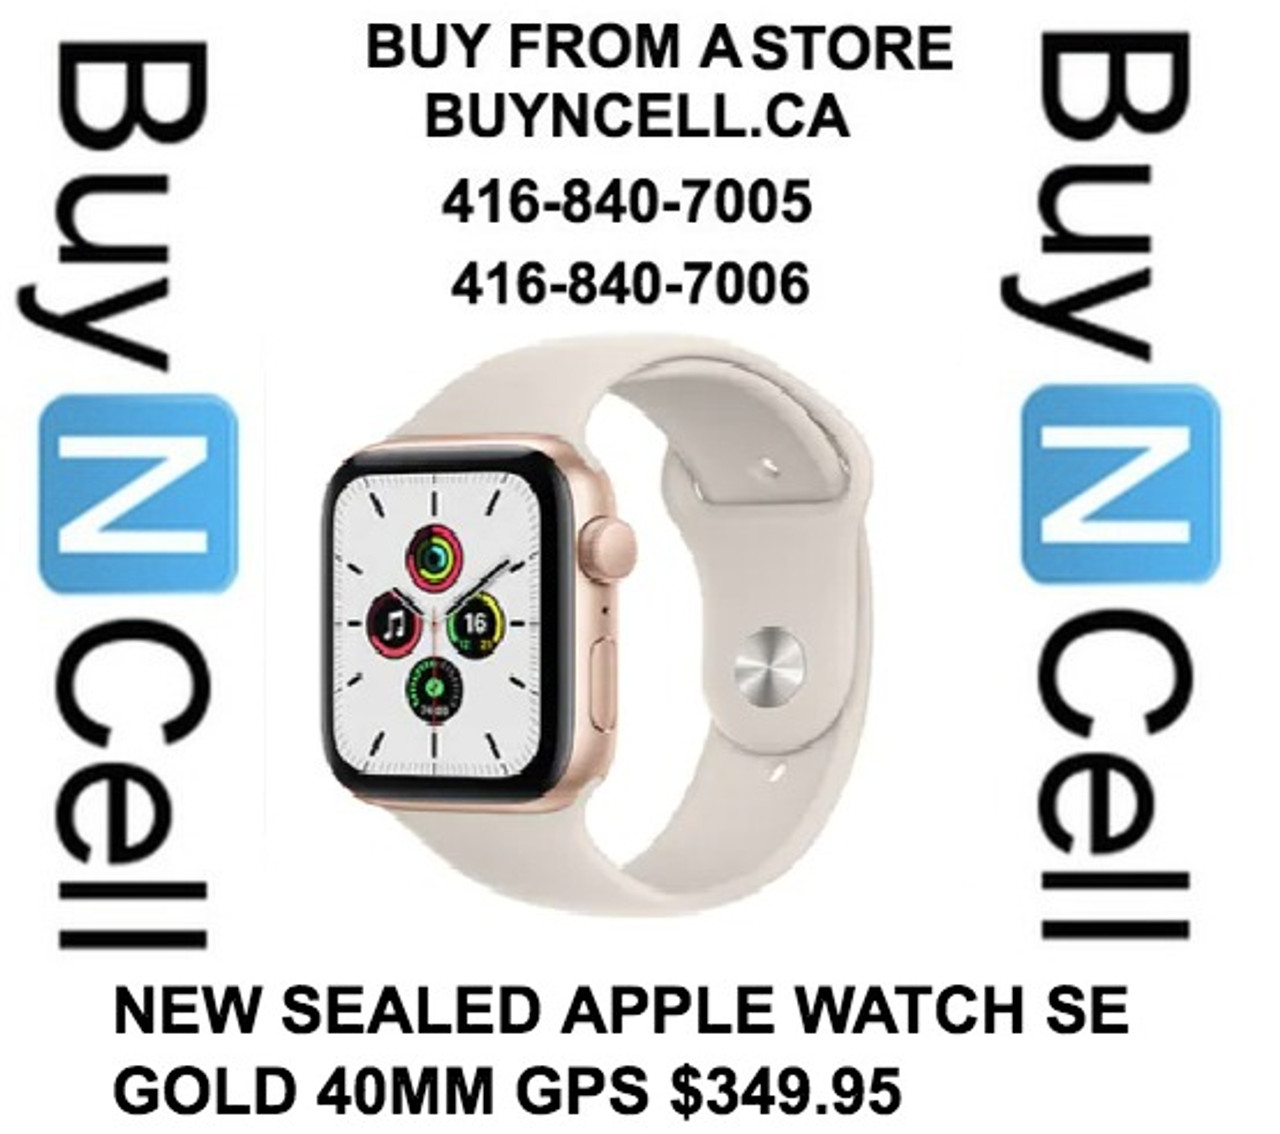 New Sealed Apple Watch SE mm GPS Gold   BuynCell Store